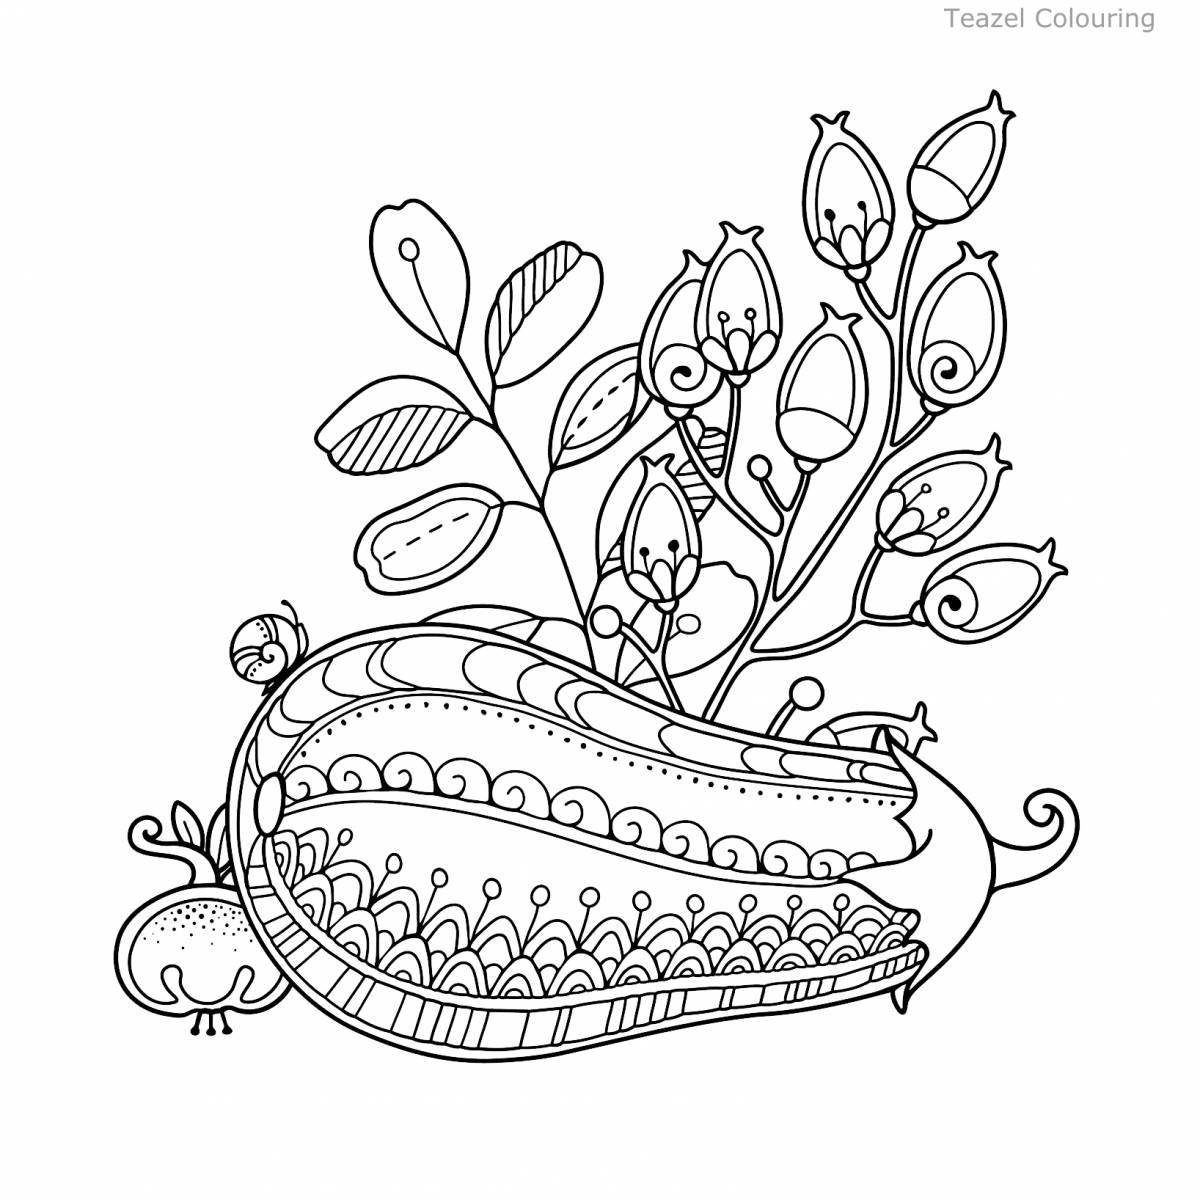 Charming coloring book antistress fruit